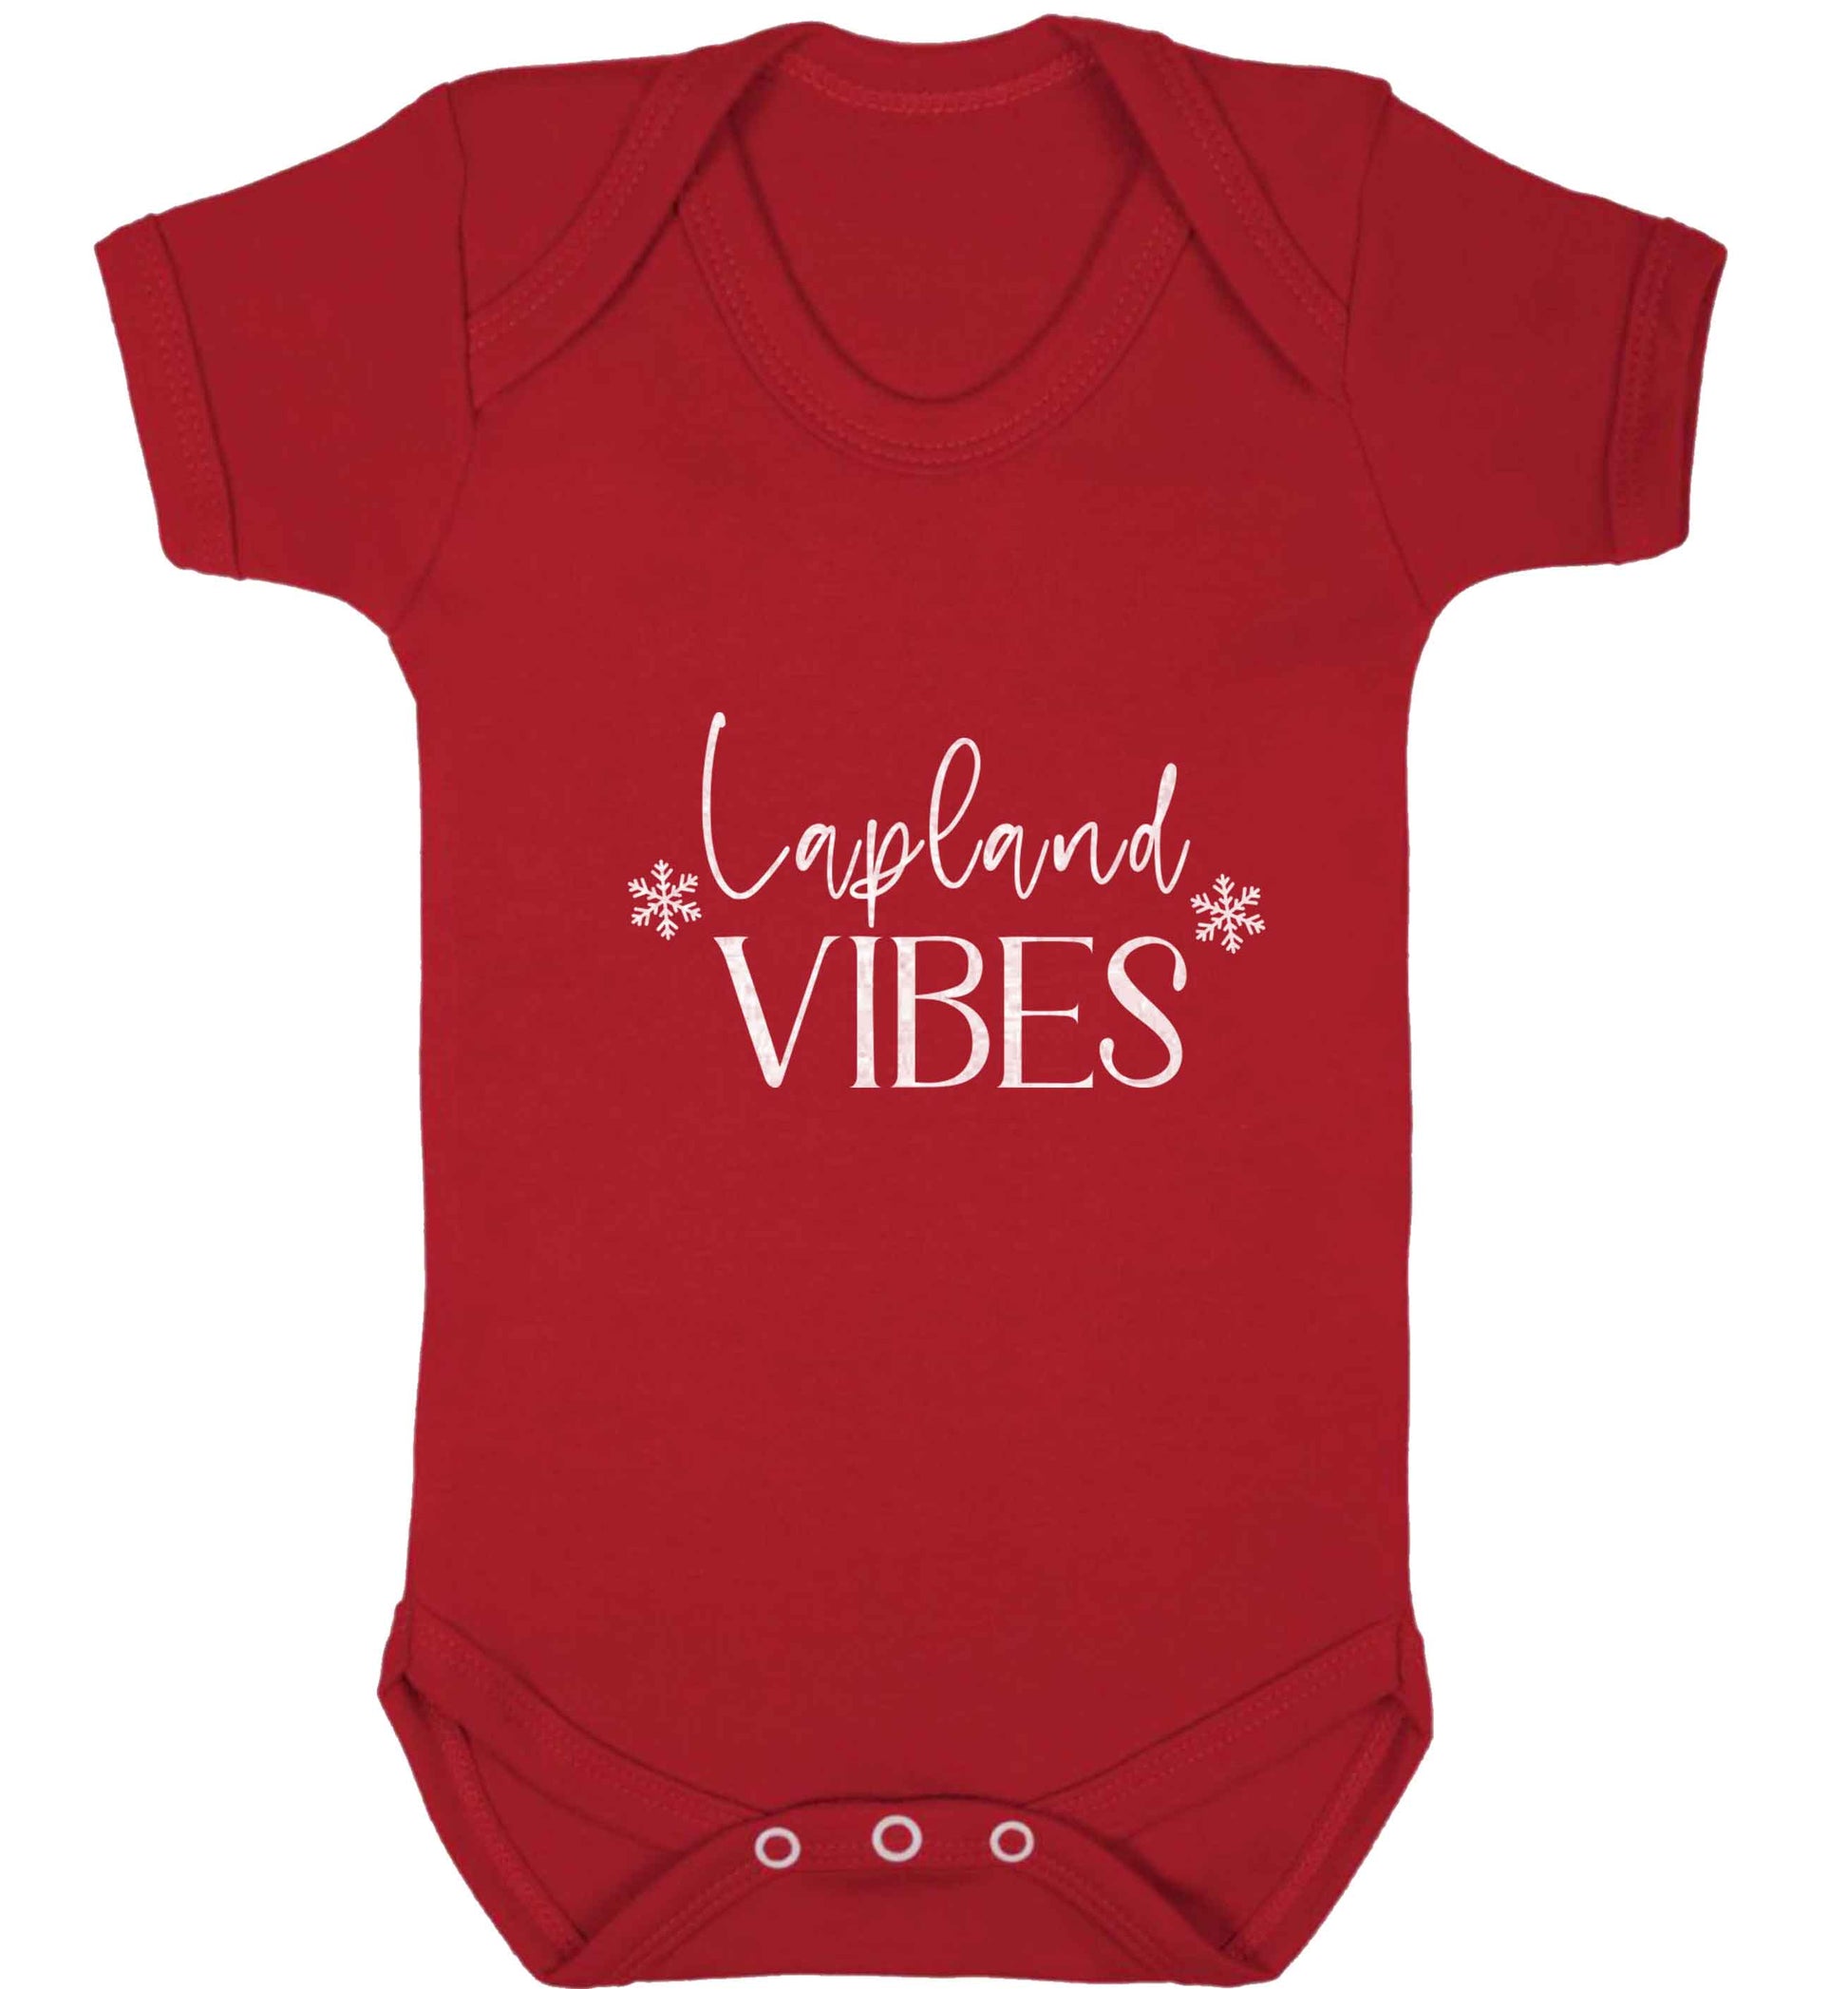 Lapland vibes baby vest red 18-24 months